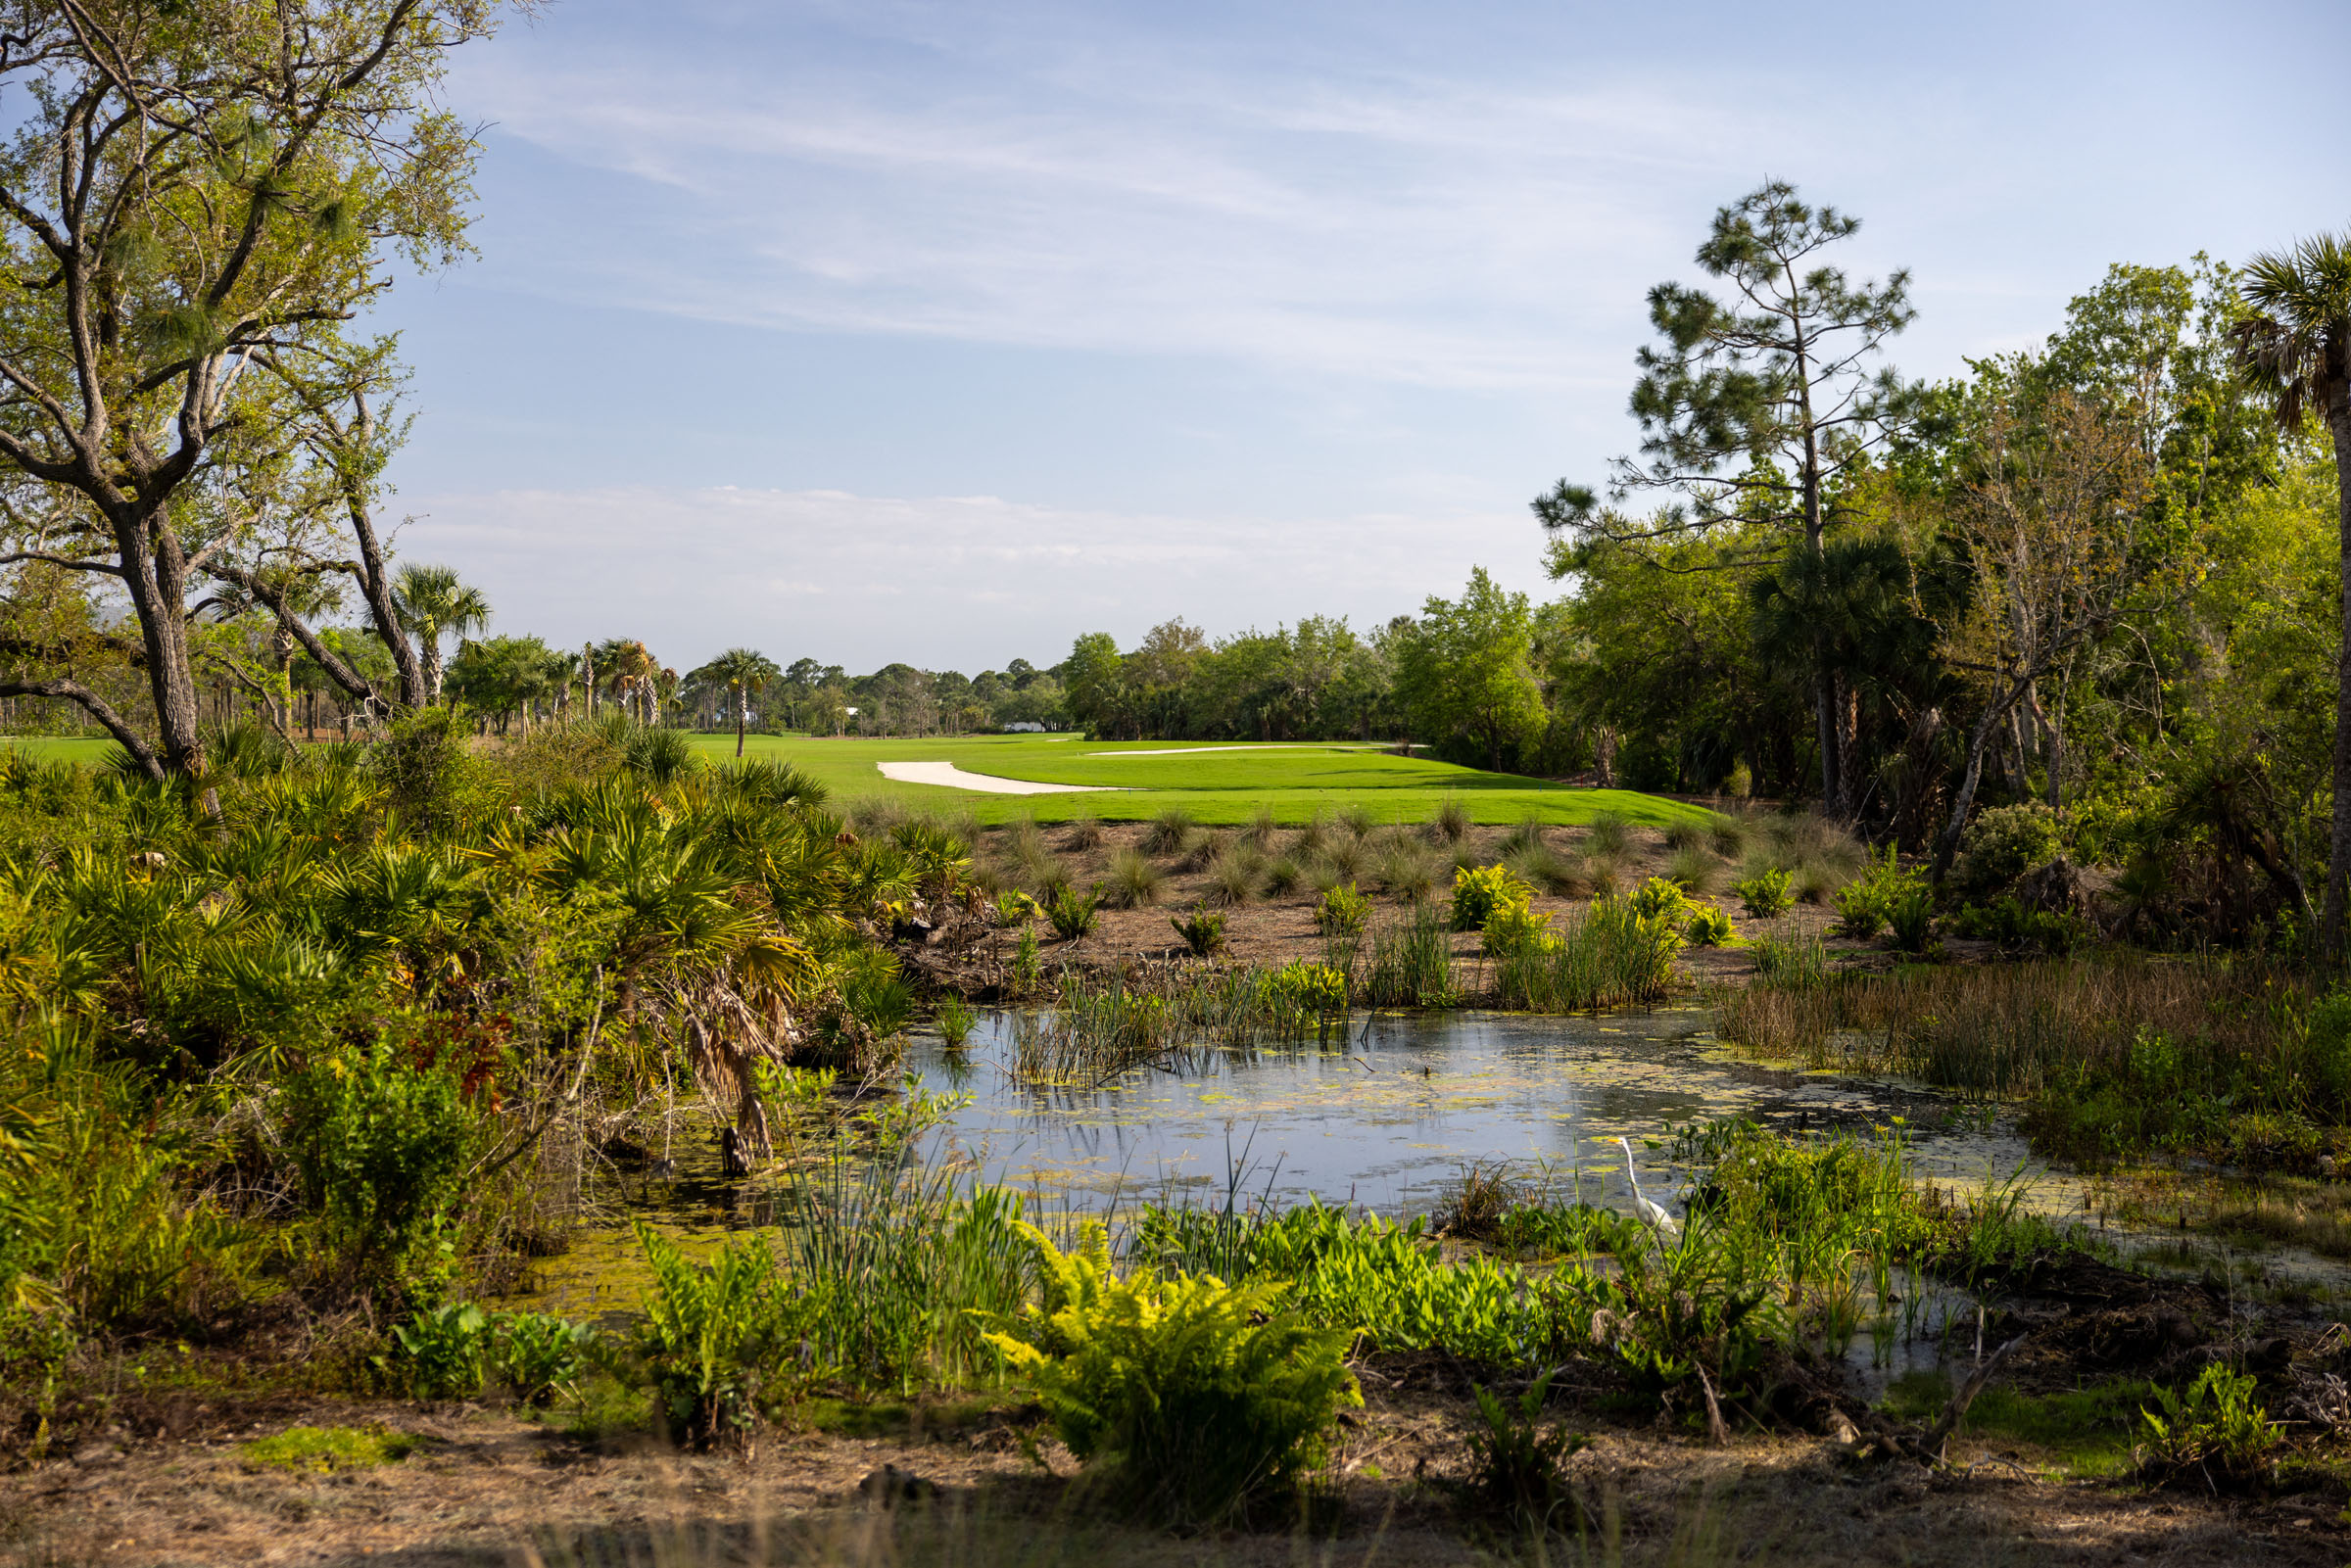 A vibrant green golf course with a sand trap in the distance, surrounded by lush trees and vegetation, overlooking a small water hazard in the foreground.